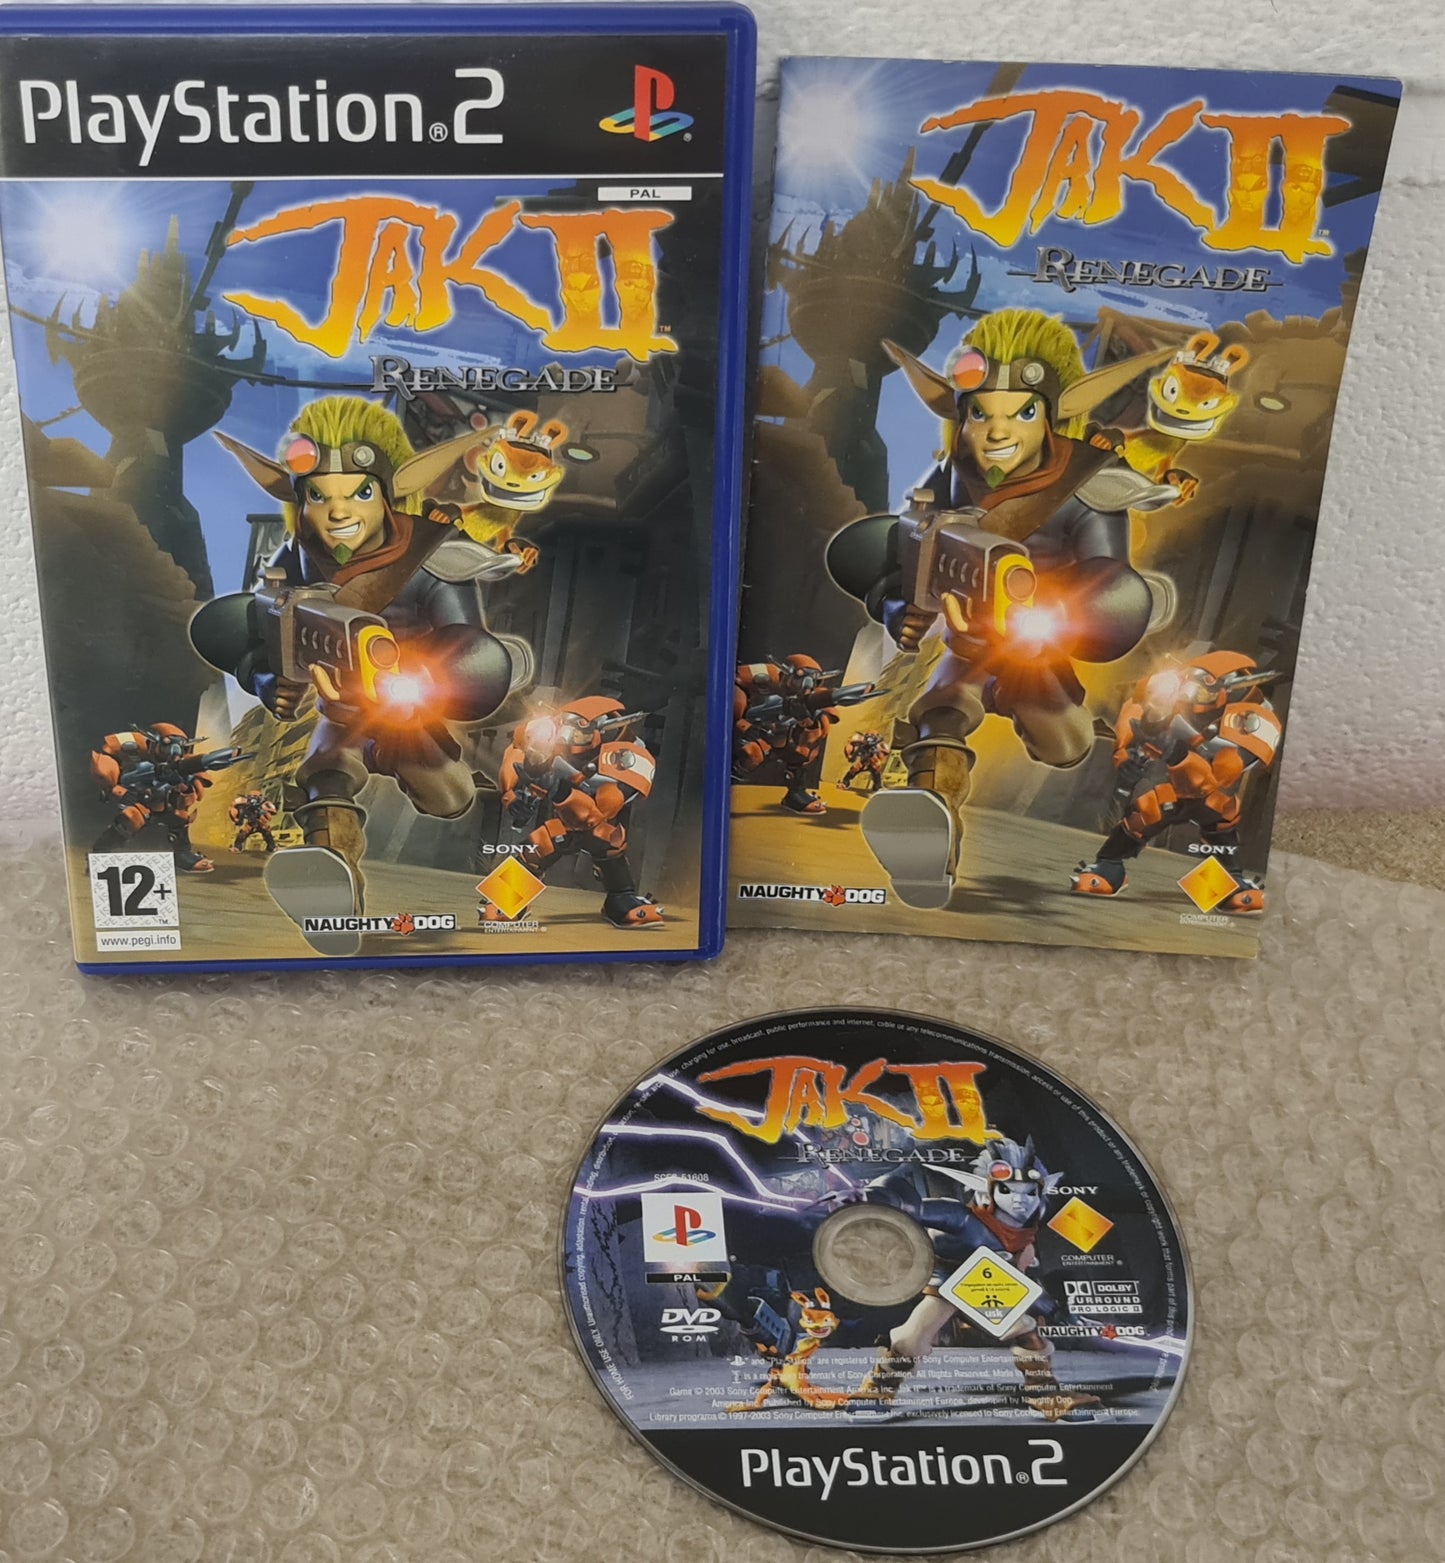 Jak II Renegade Sony Playstation 2 (PS2) Game